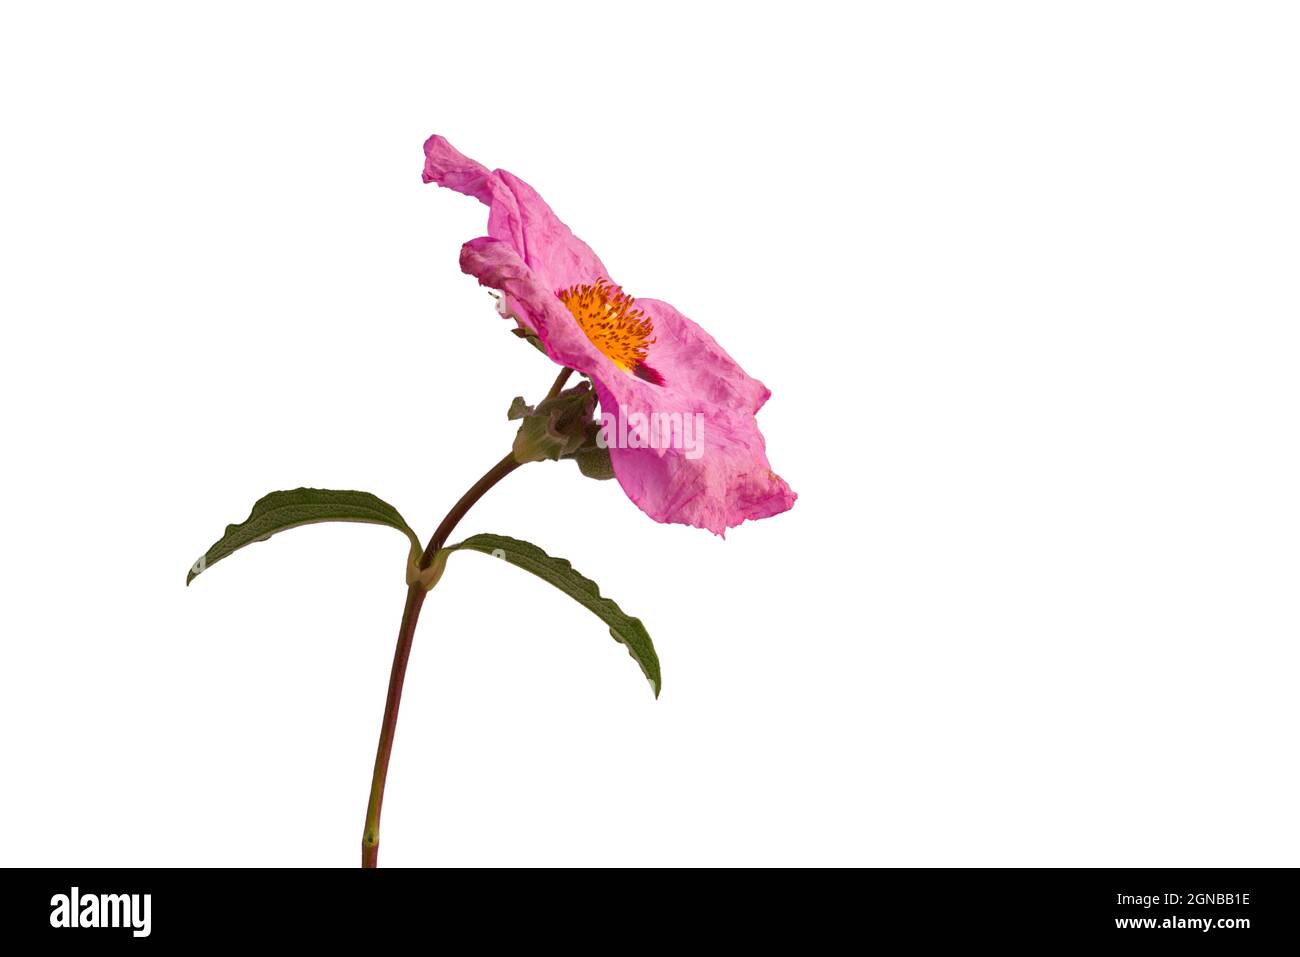 Cistus family Cistaceae or Rock Rose blossom isolated on white background Stock Photo